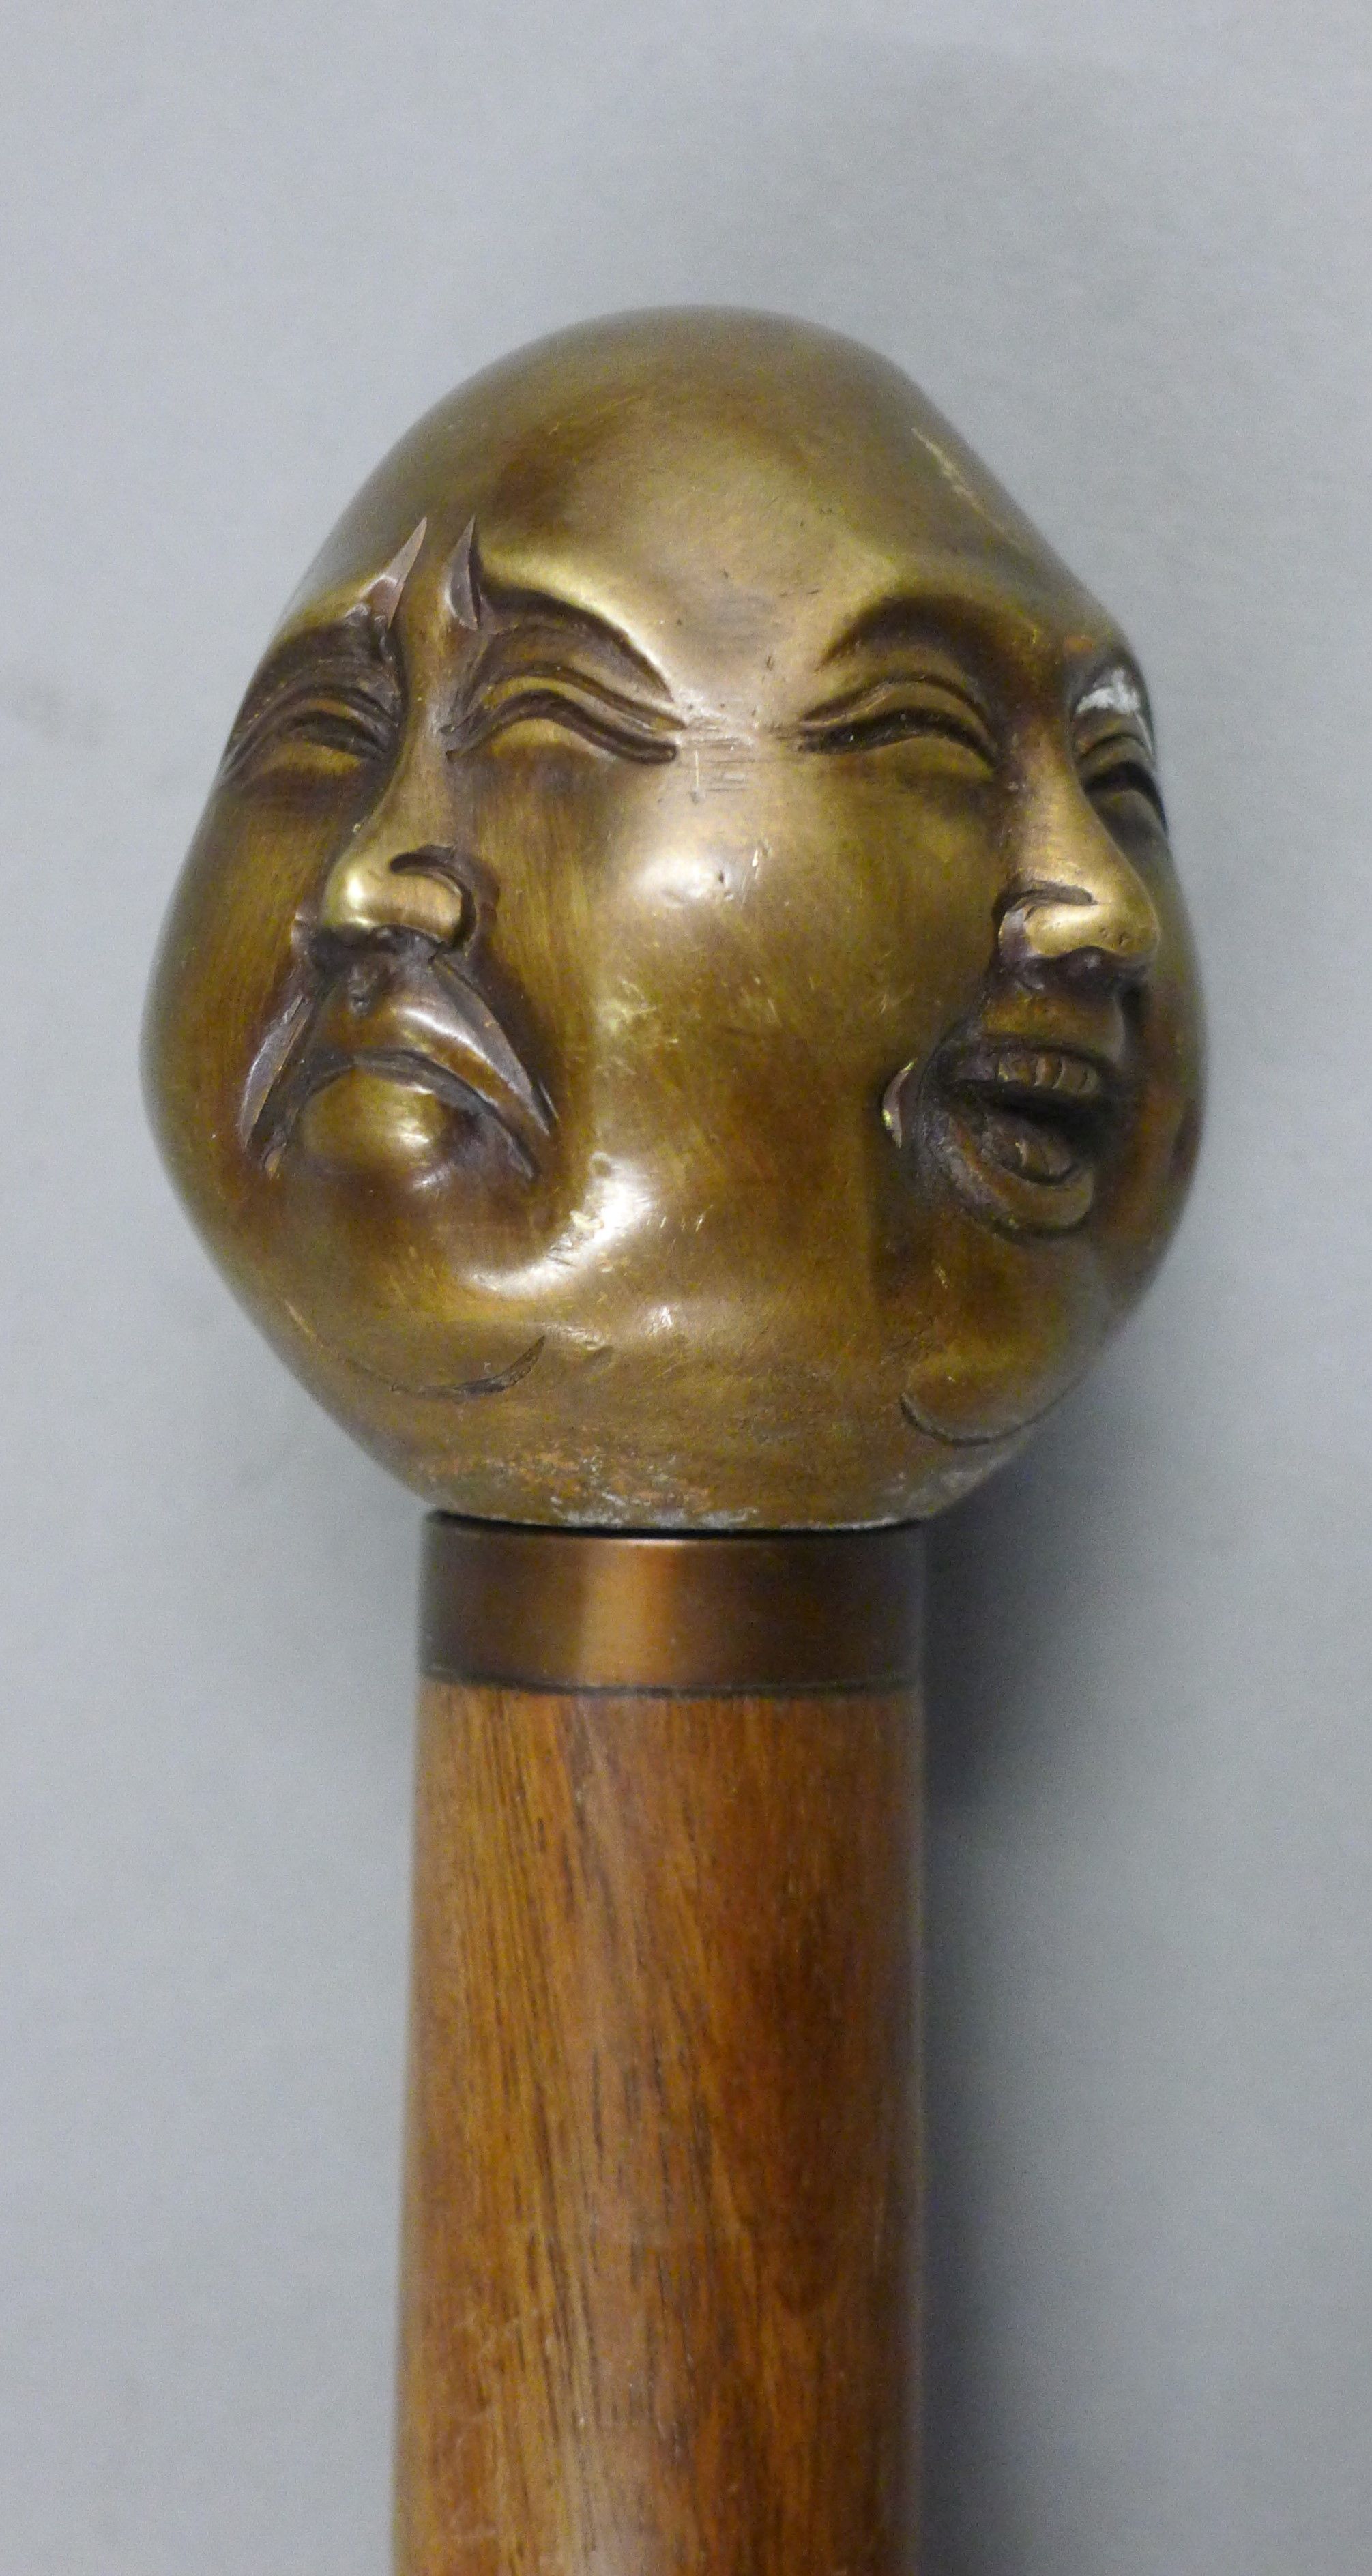 A walking stick with four-faced Buddha handle. 92 cm long. - Image 2 of 3